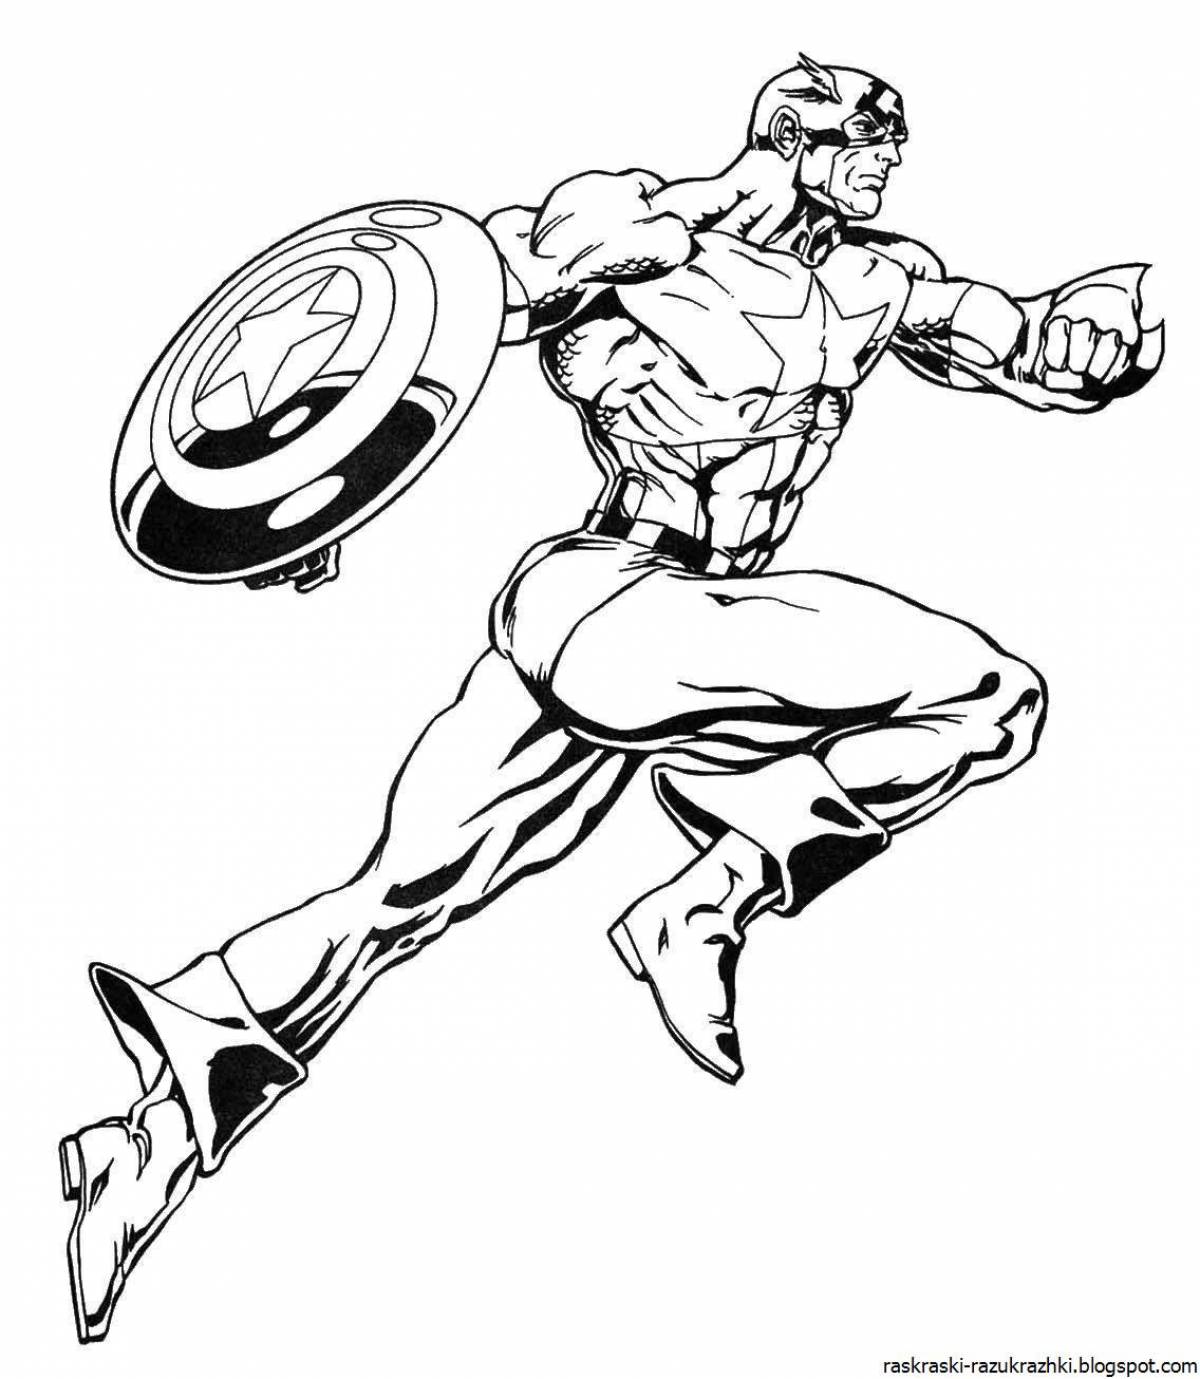 Exquisite marvel heroes coloring book